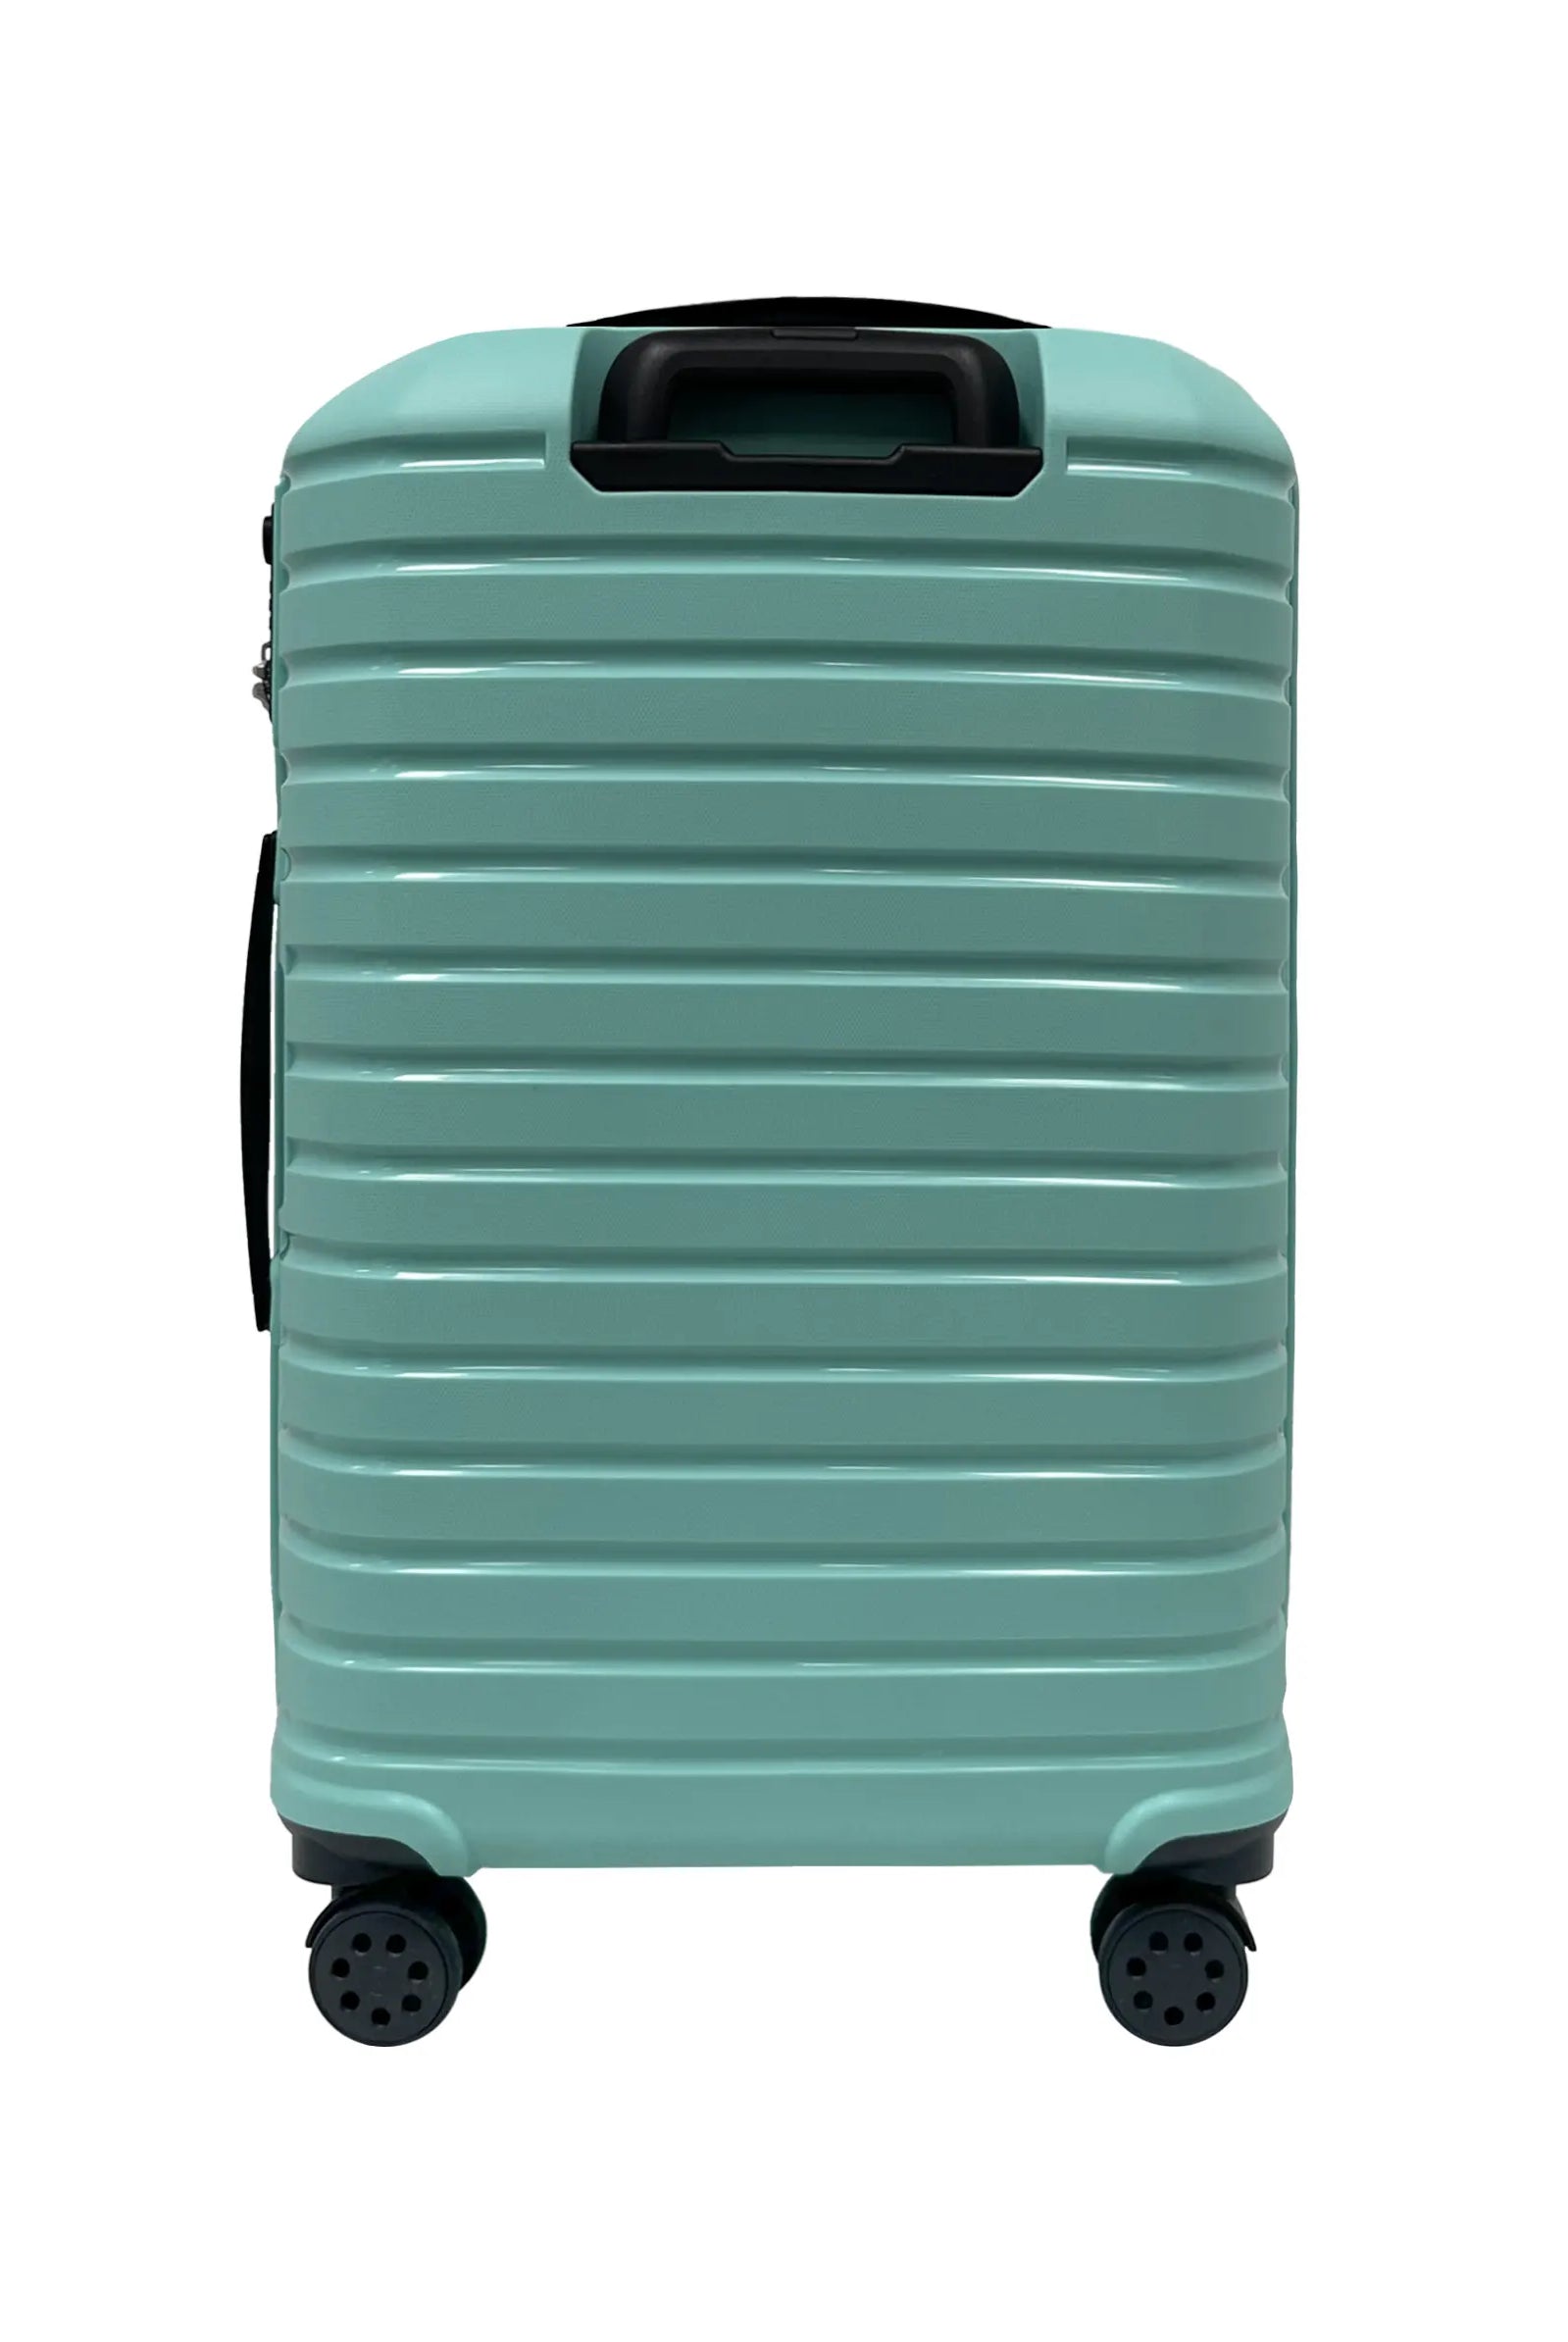 Luggage green suitcase